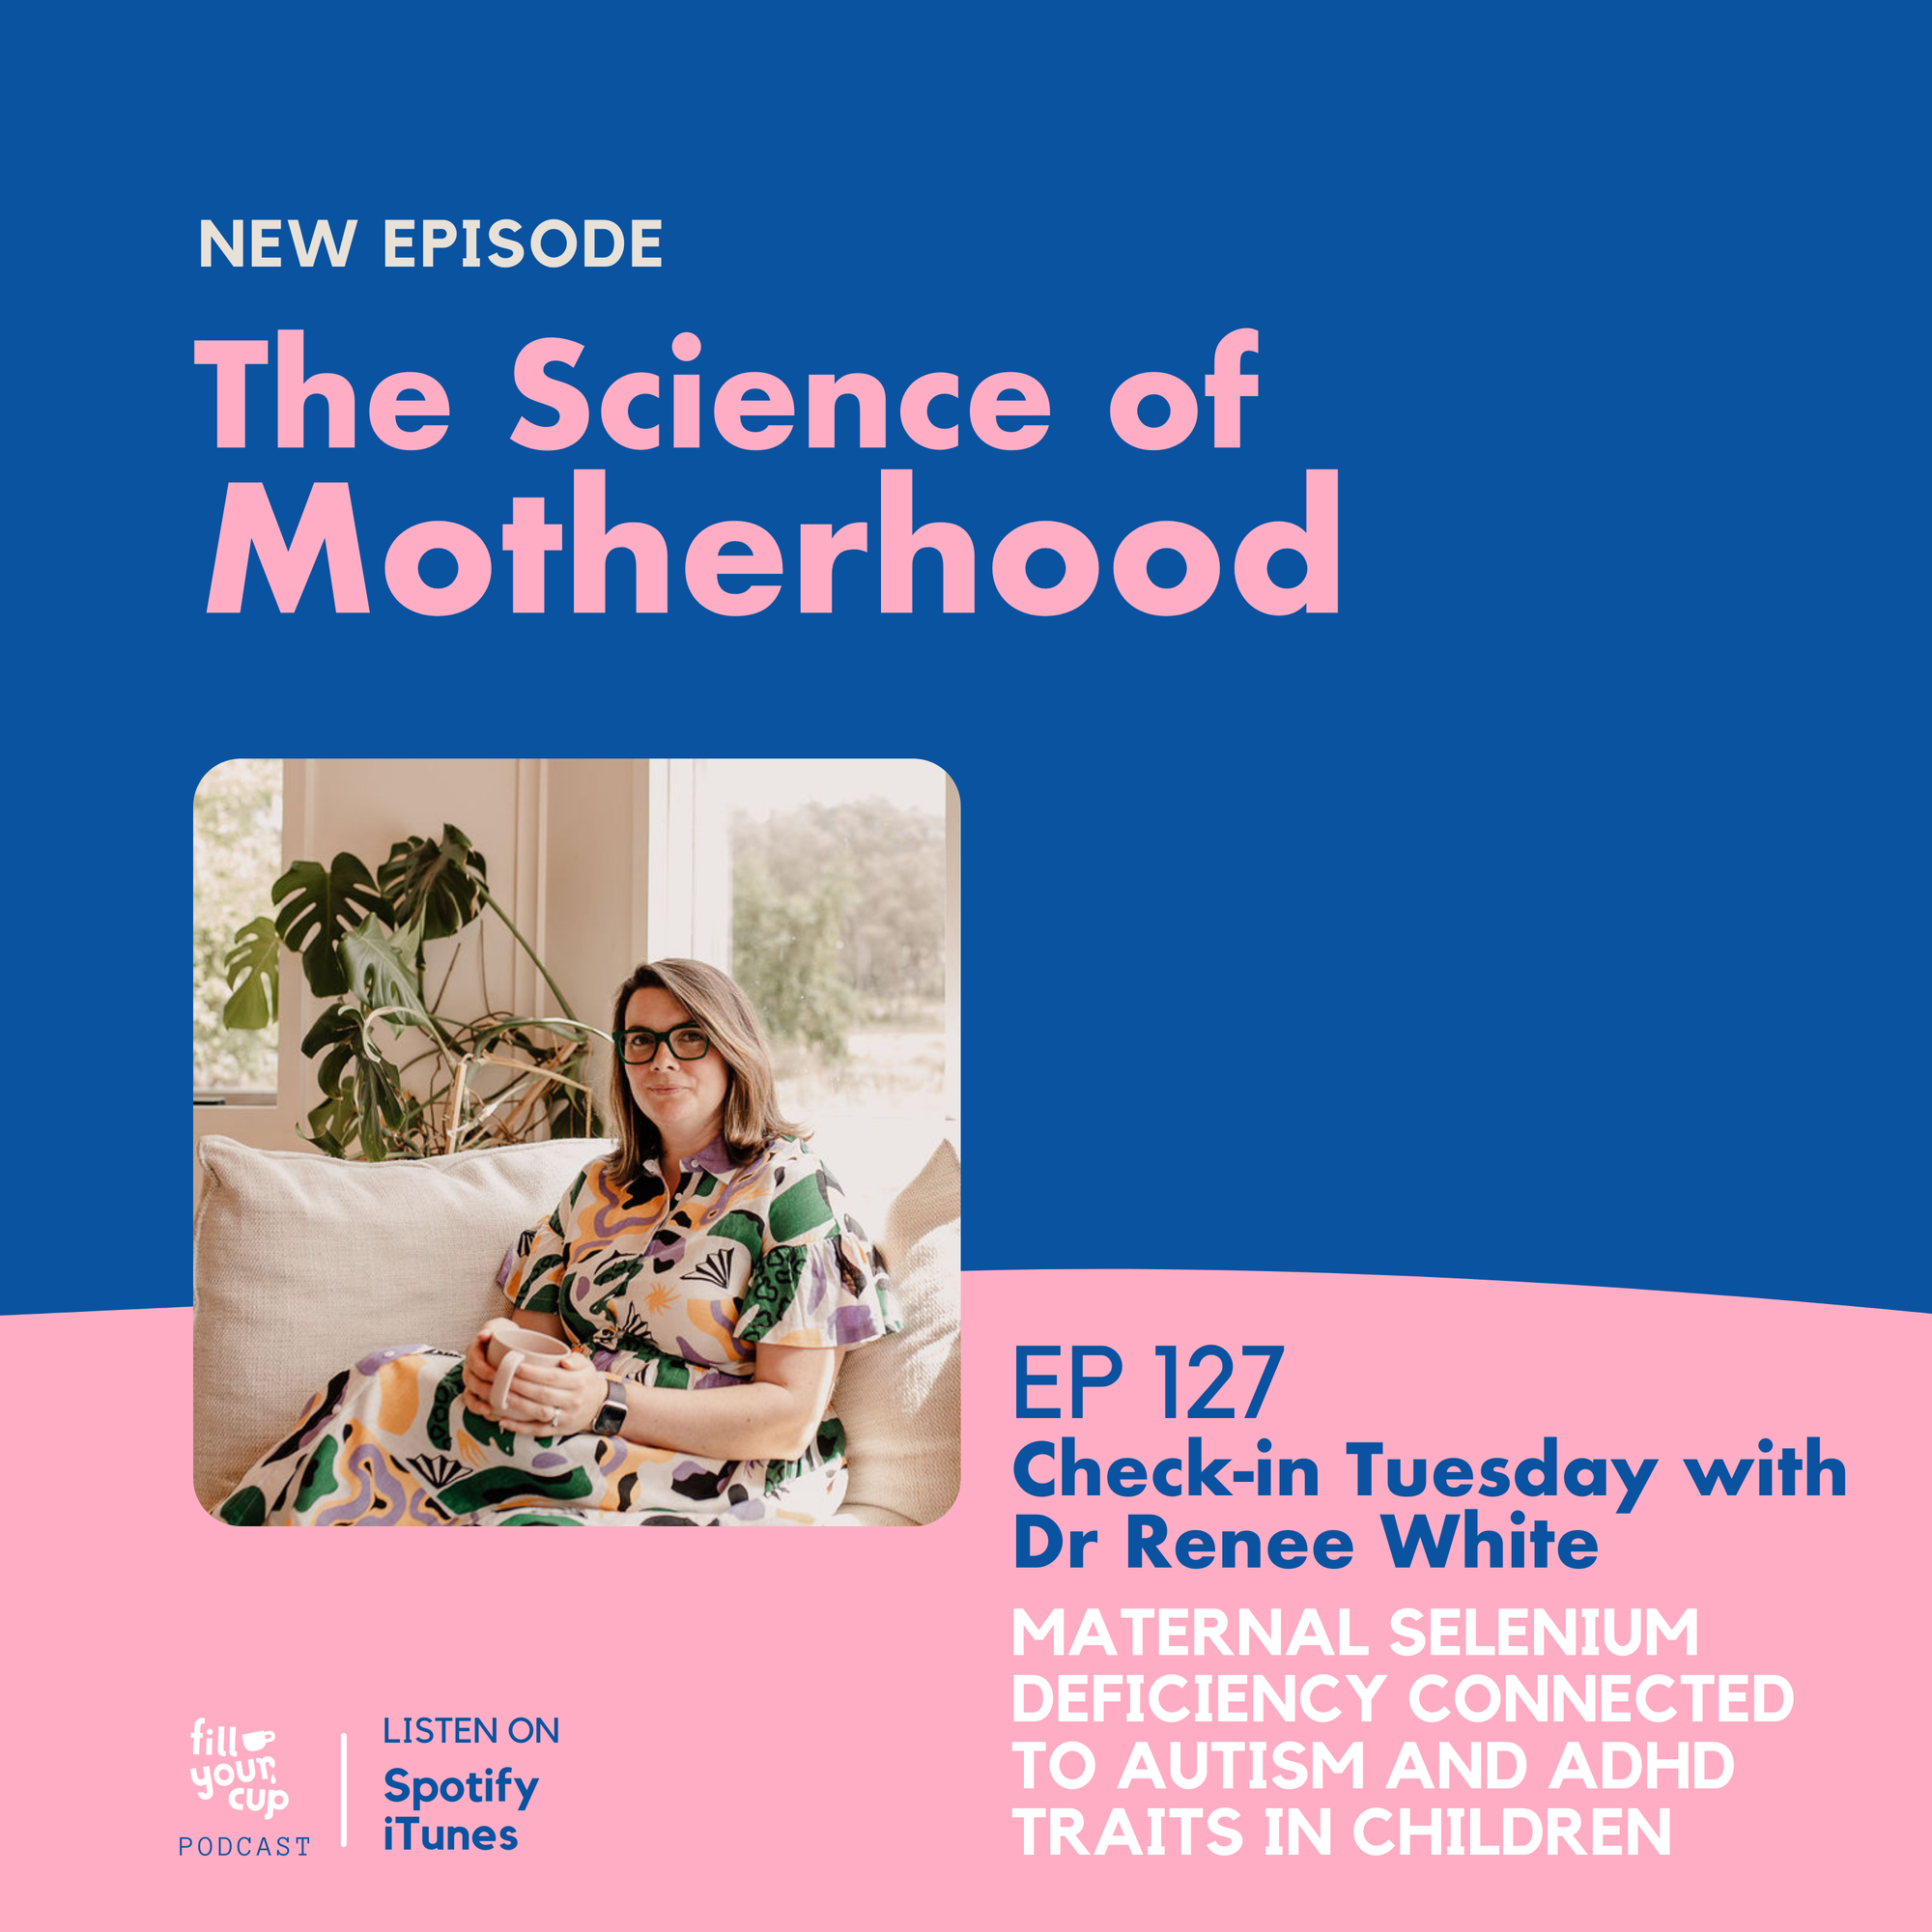 Ep 127. Check In Tuesday with Dr Renee White - Maternal selenium deficiency connected to autism and ADHD traits in children